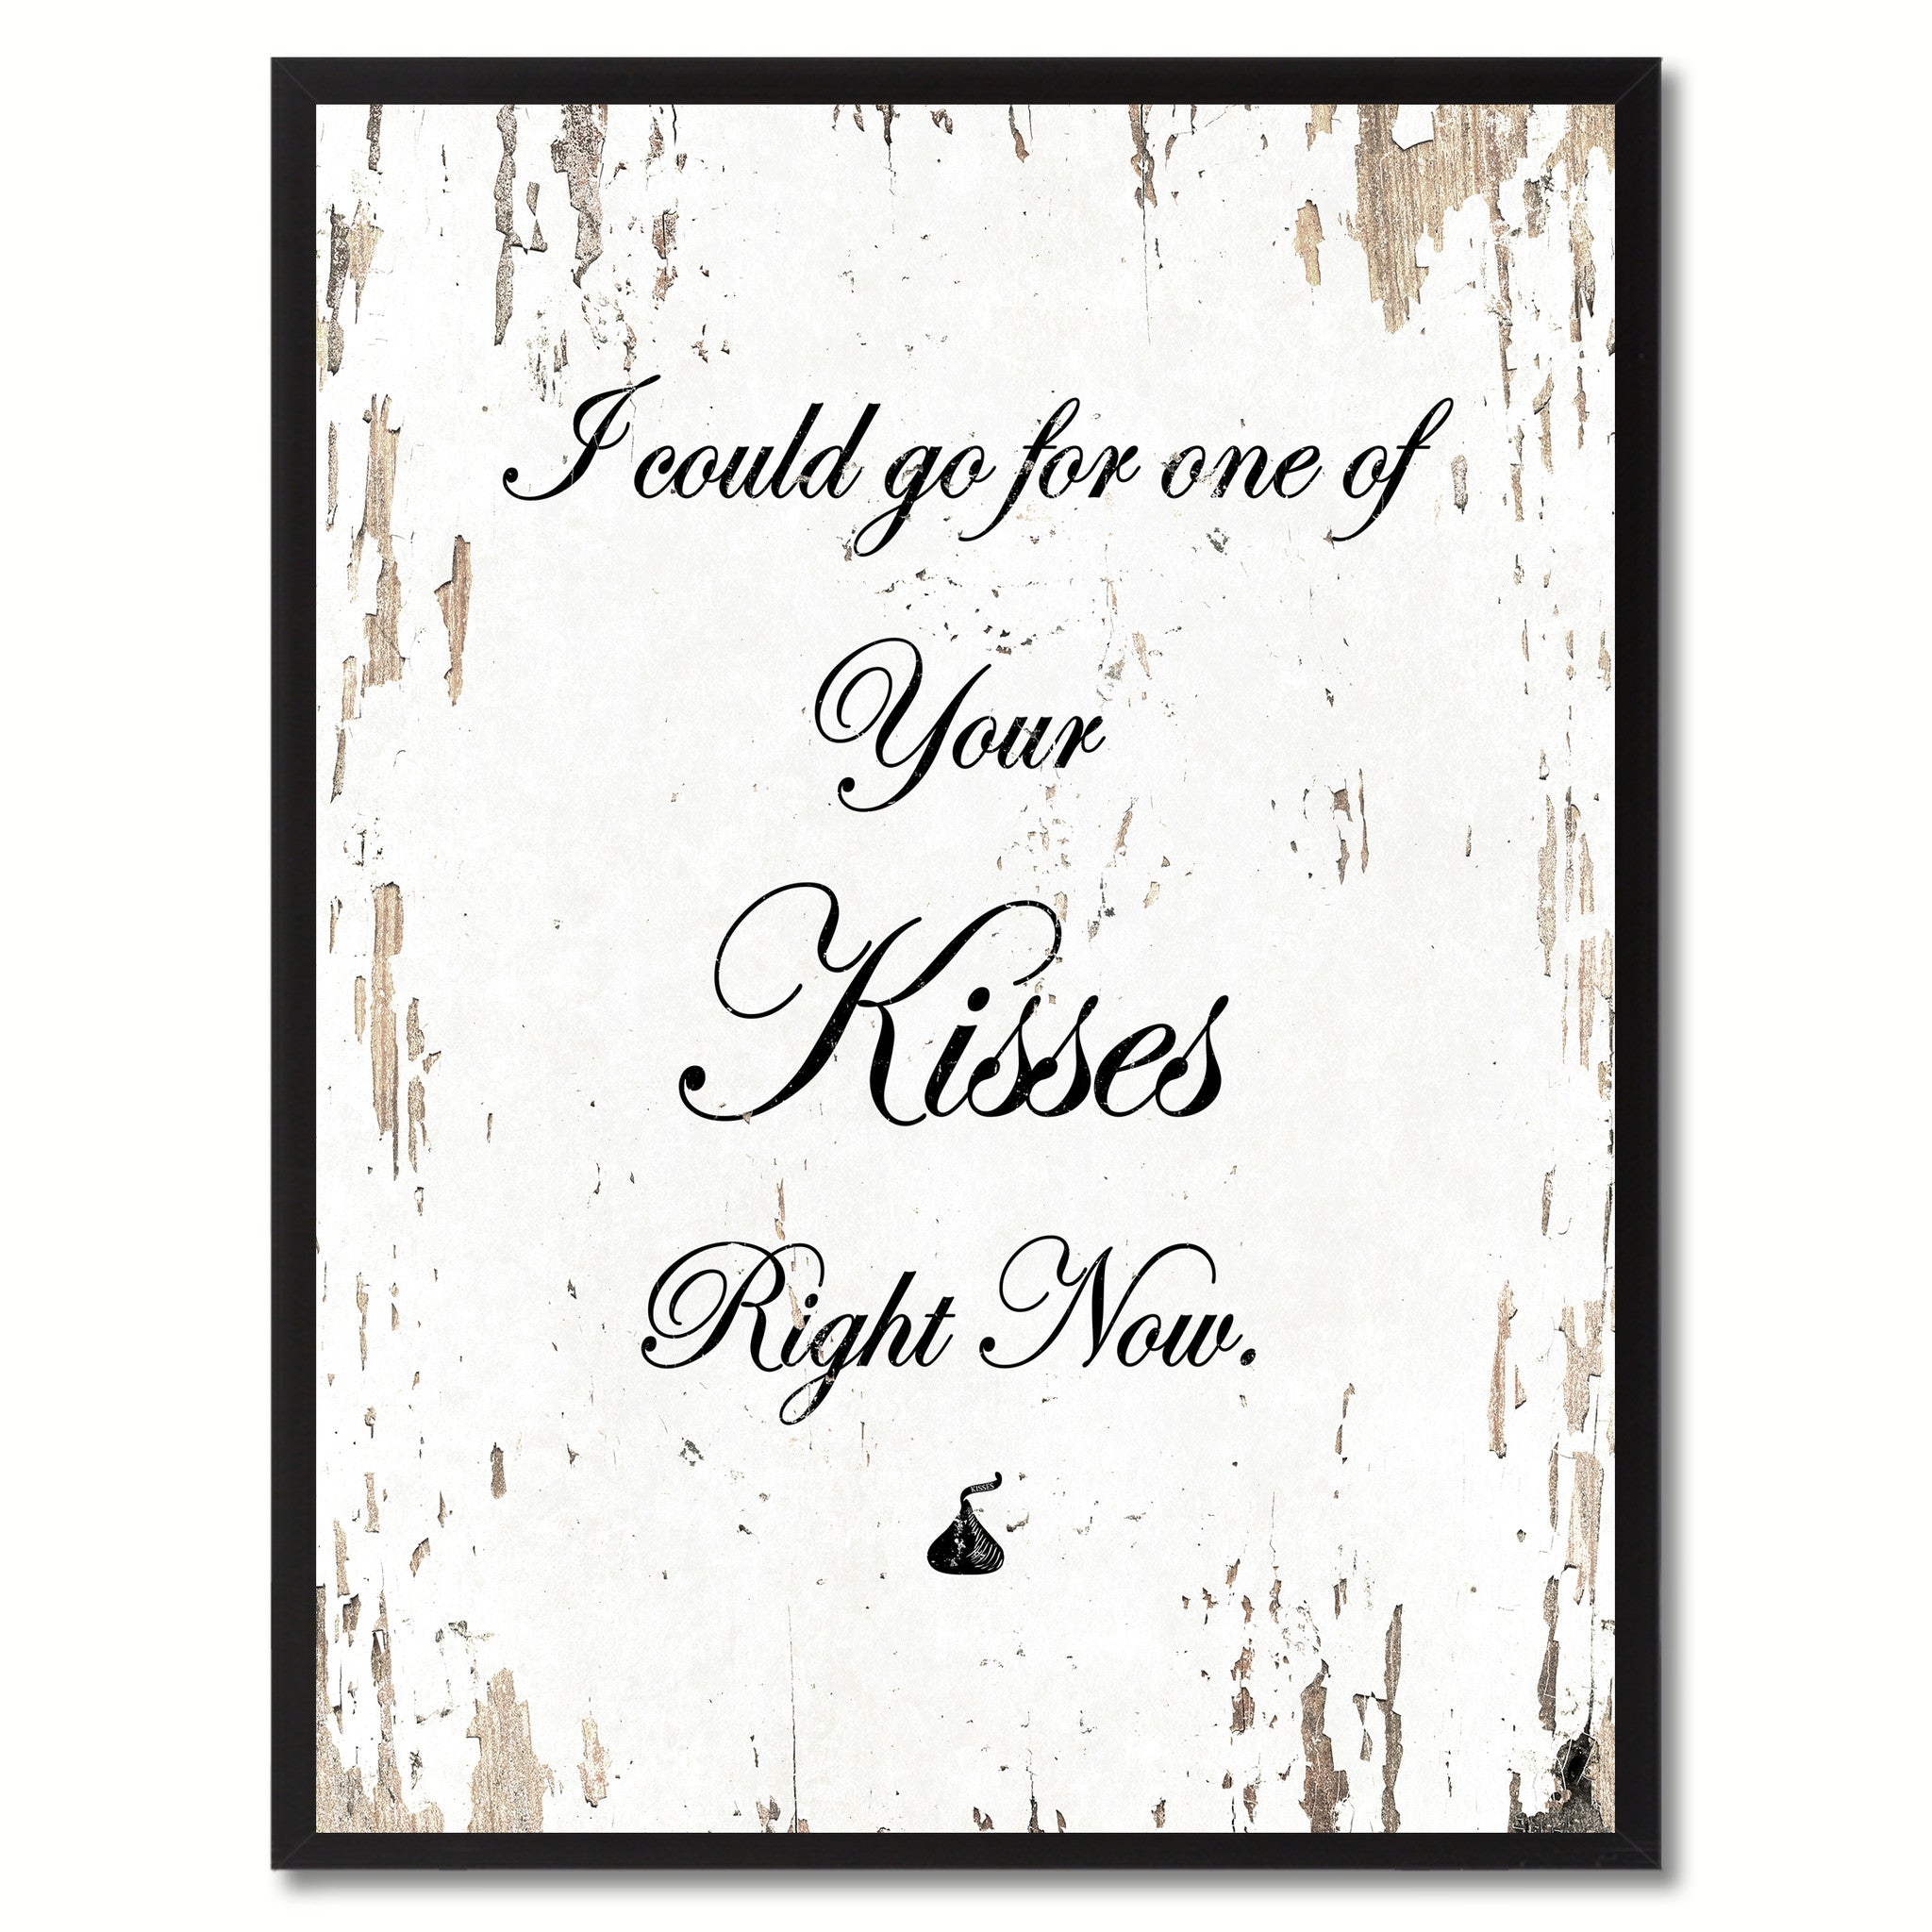 I could go for one of your kisses right now Happy Quote Saying Gift Ideas Home Decor Wall Art